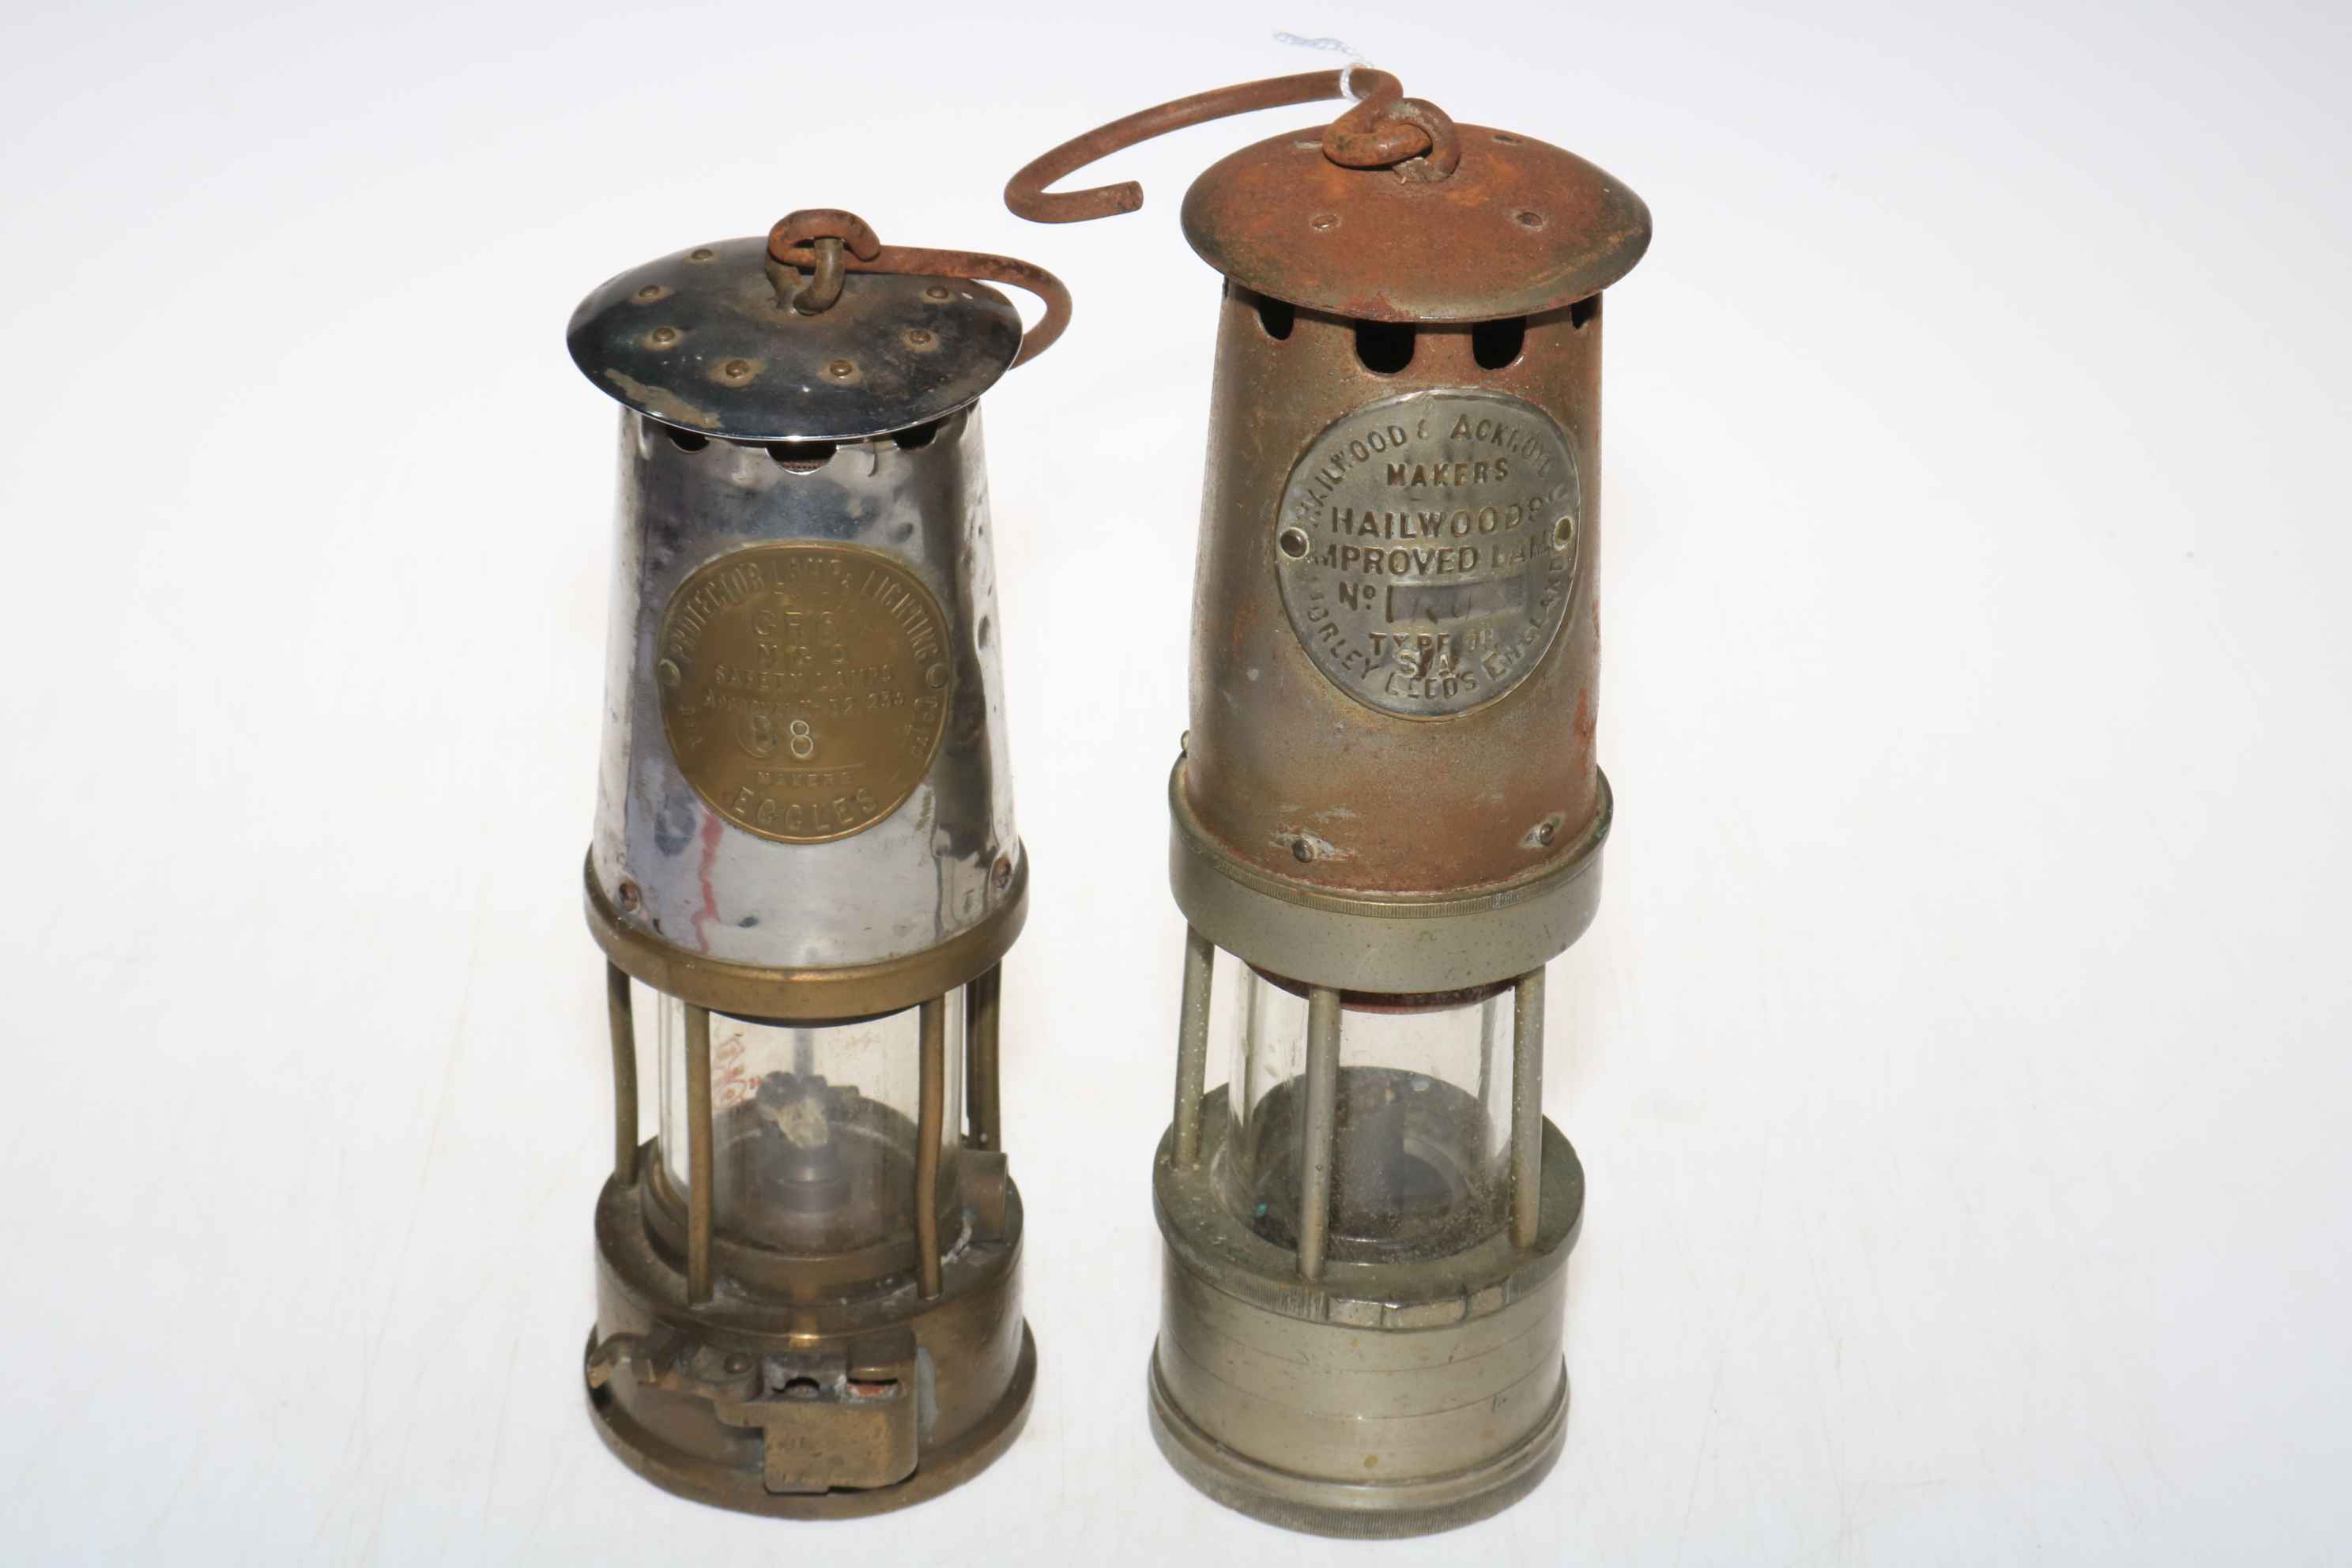 Two miners lamps by Protector Lamp Co.